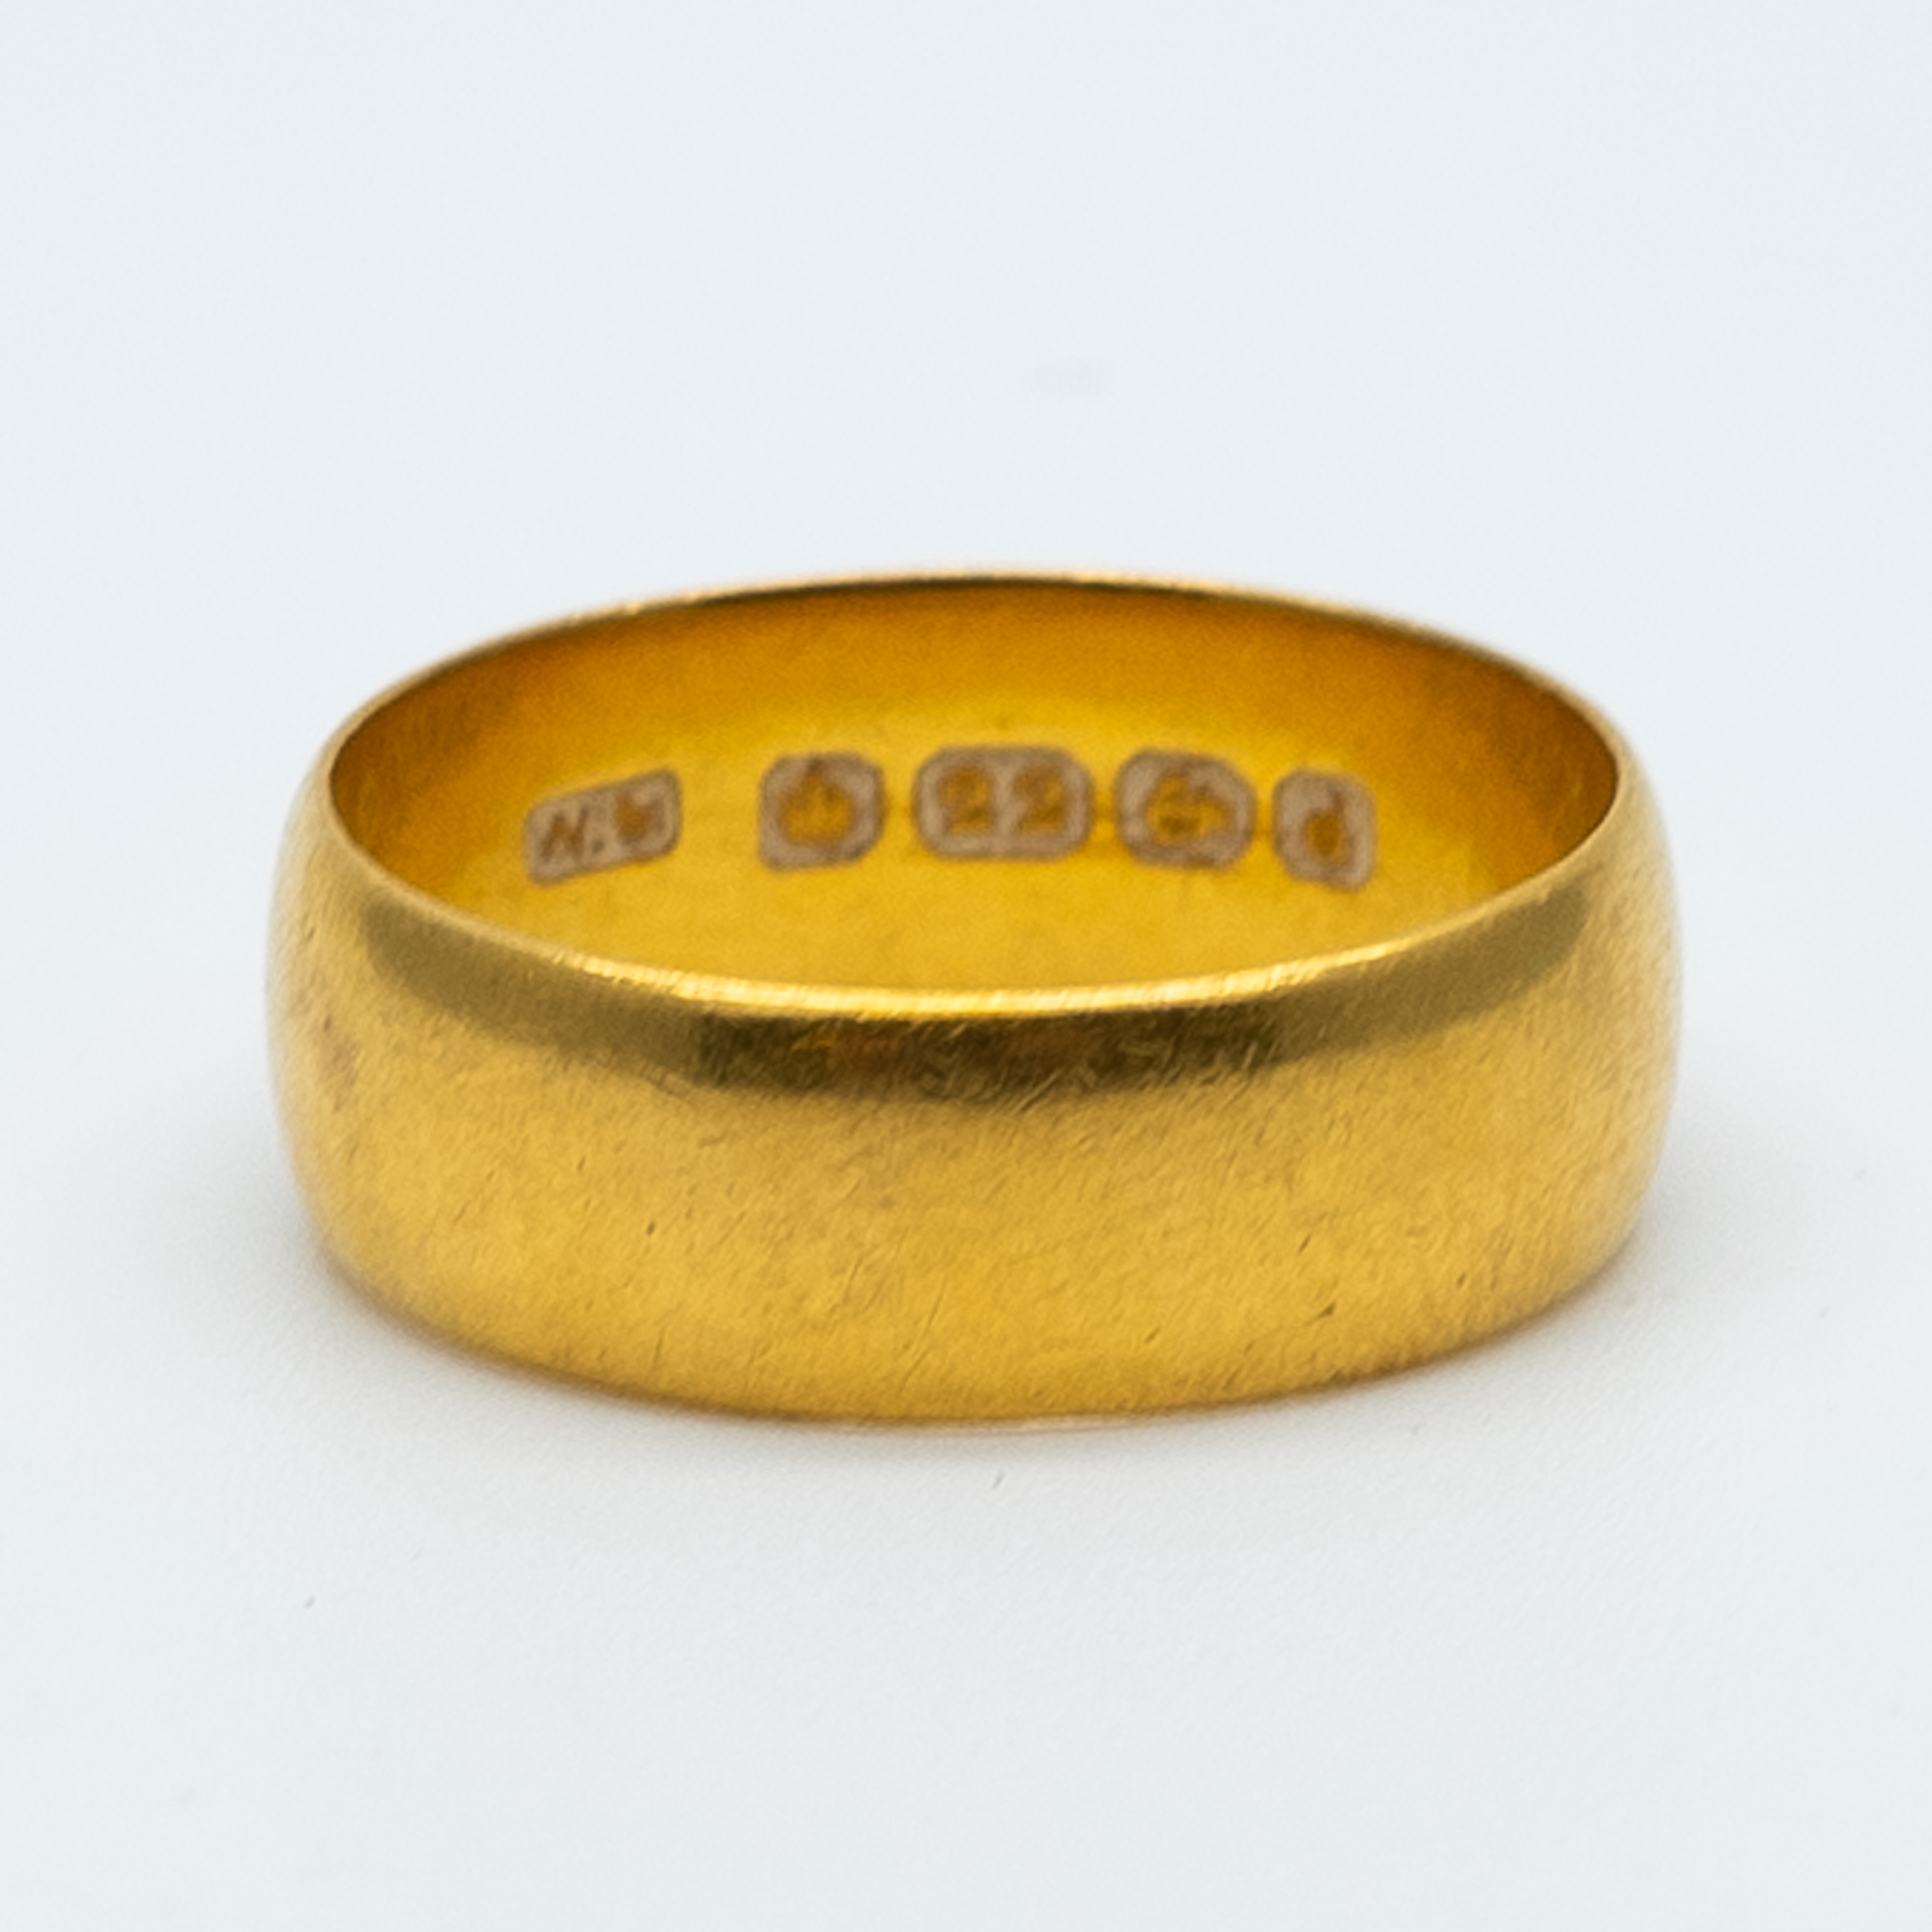 A 22ct yellow gold wedding band - Image 2 of 3